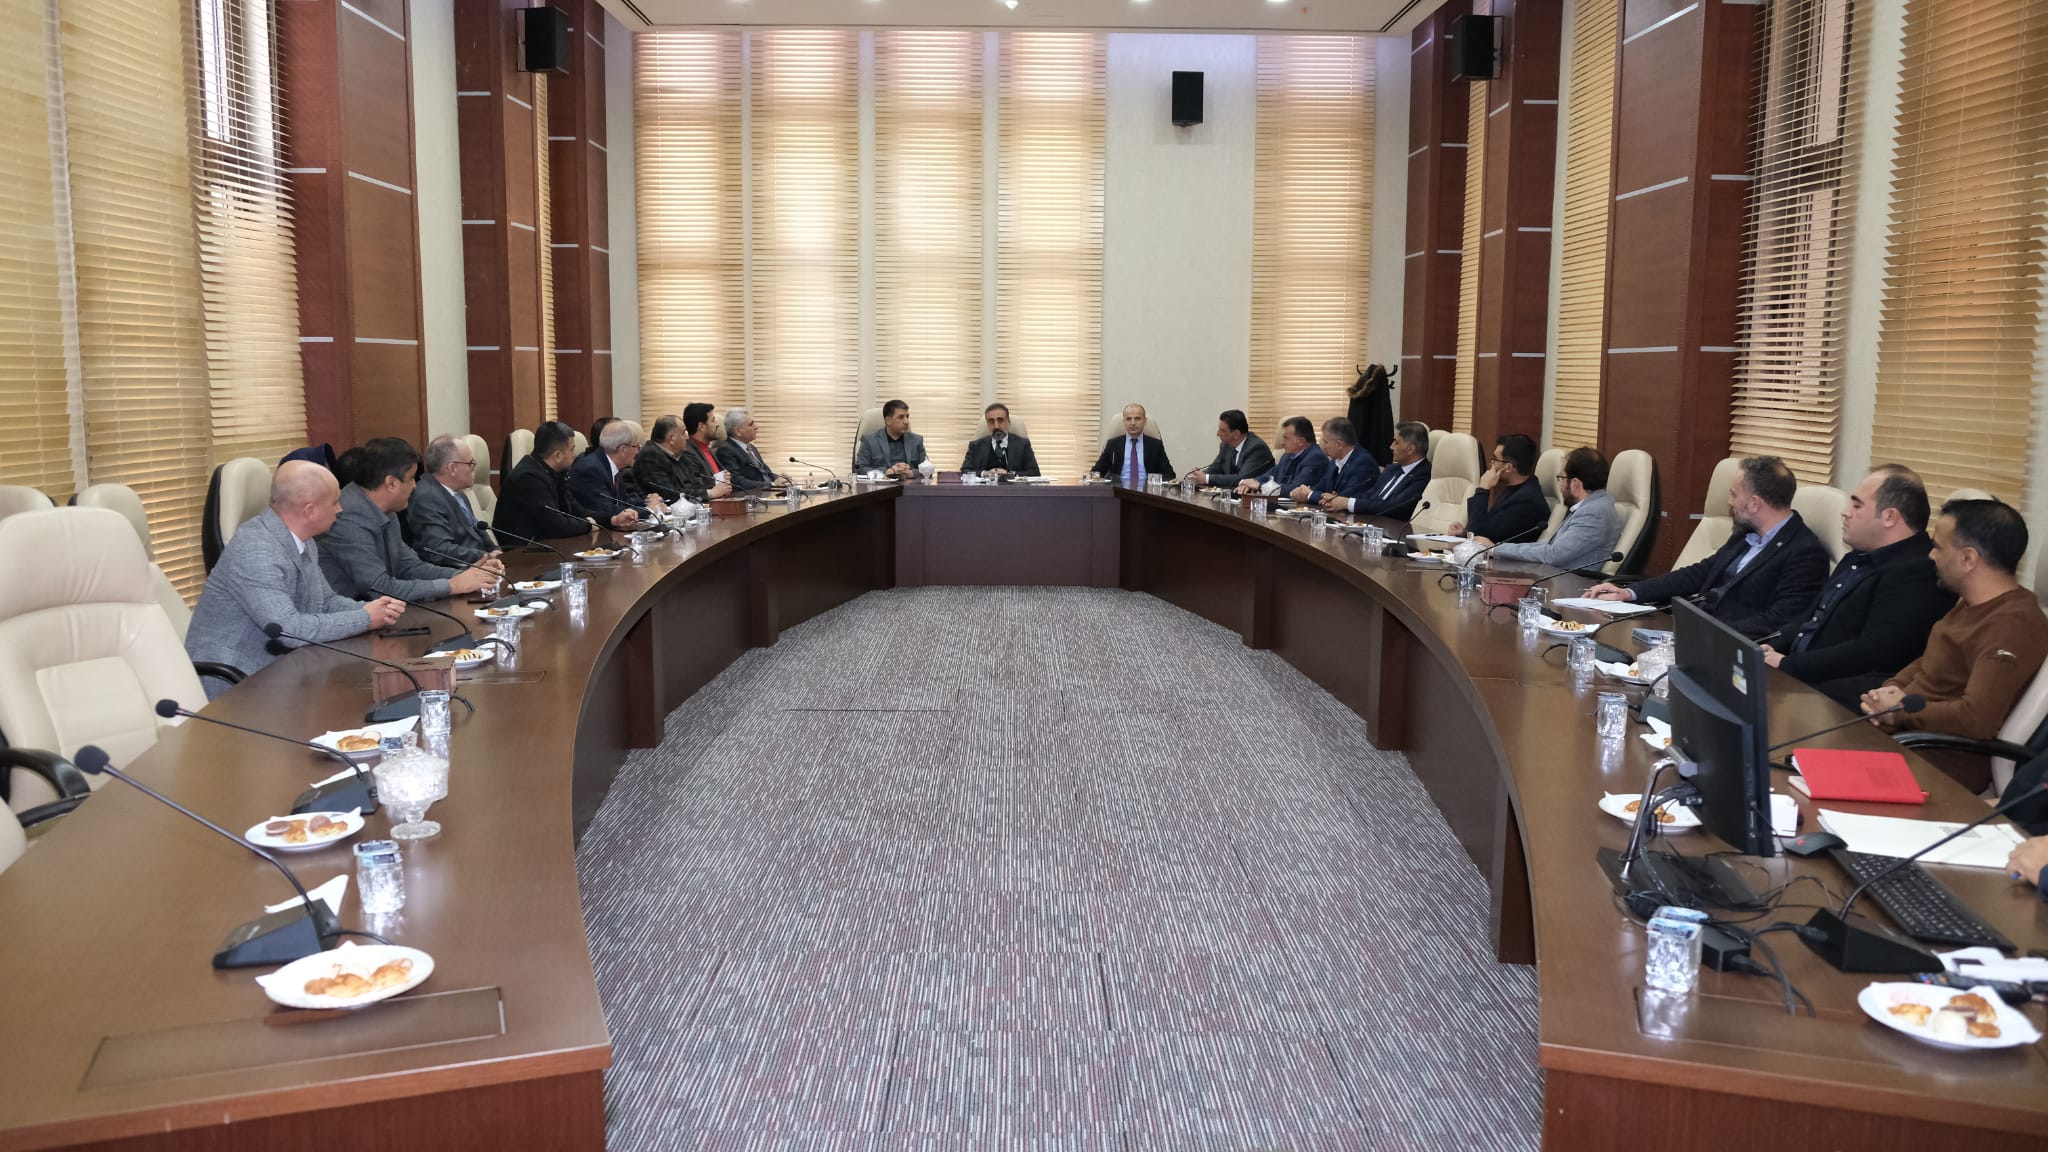 UNIVERSITIES AND INSTITUTIONS IN MARDIN ADDRESS DEVELOPMENT ON A REGIONAL DIMENSION